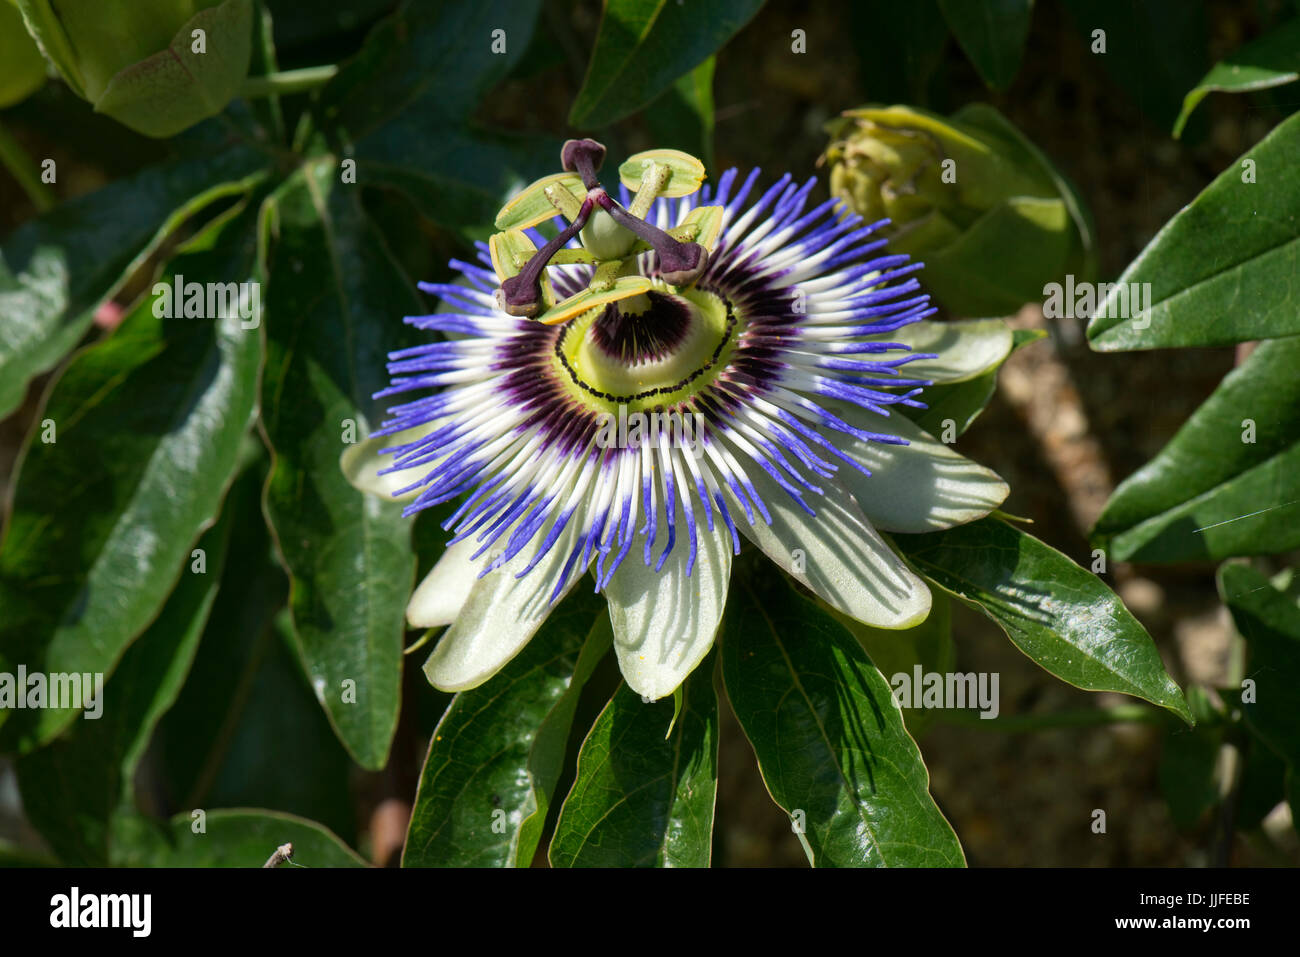 Blue passion flower, Passiflora caerulea, fully open and demonstrate several symbols of Christian belief from which it derives its name, Berkshire, Ju Stock Photo